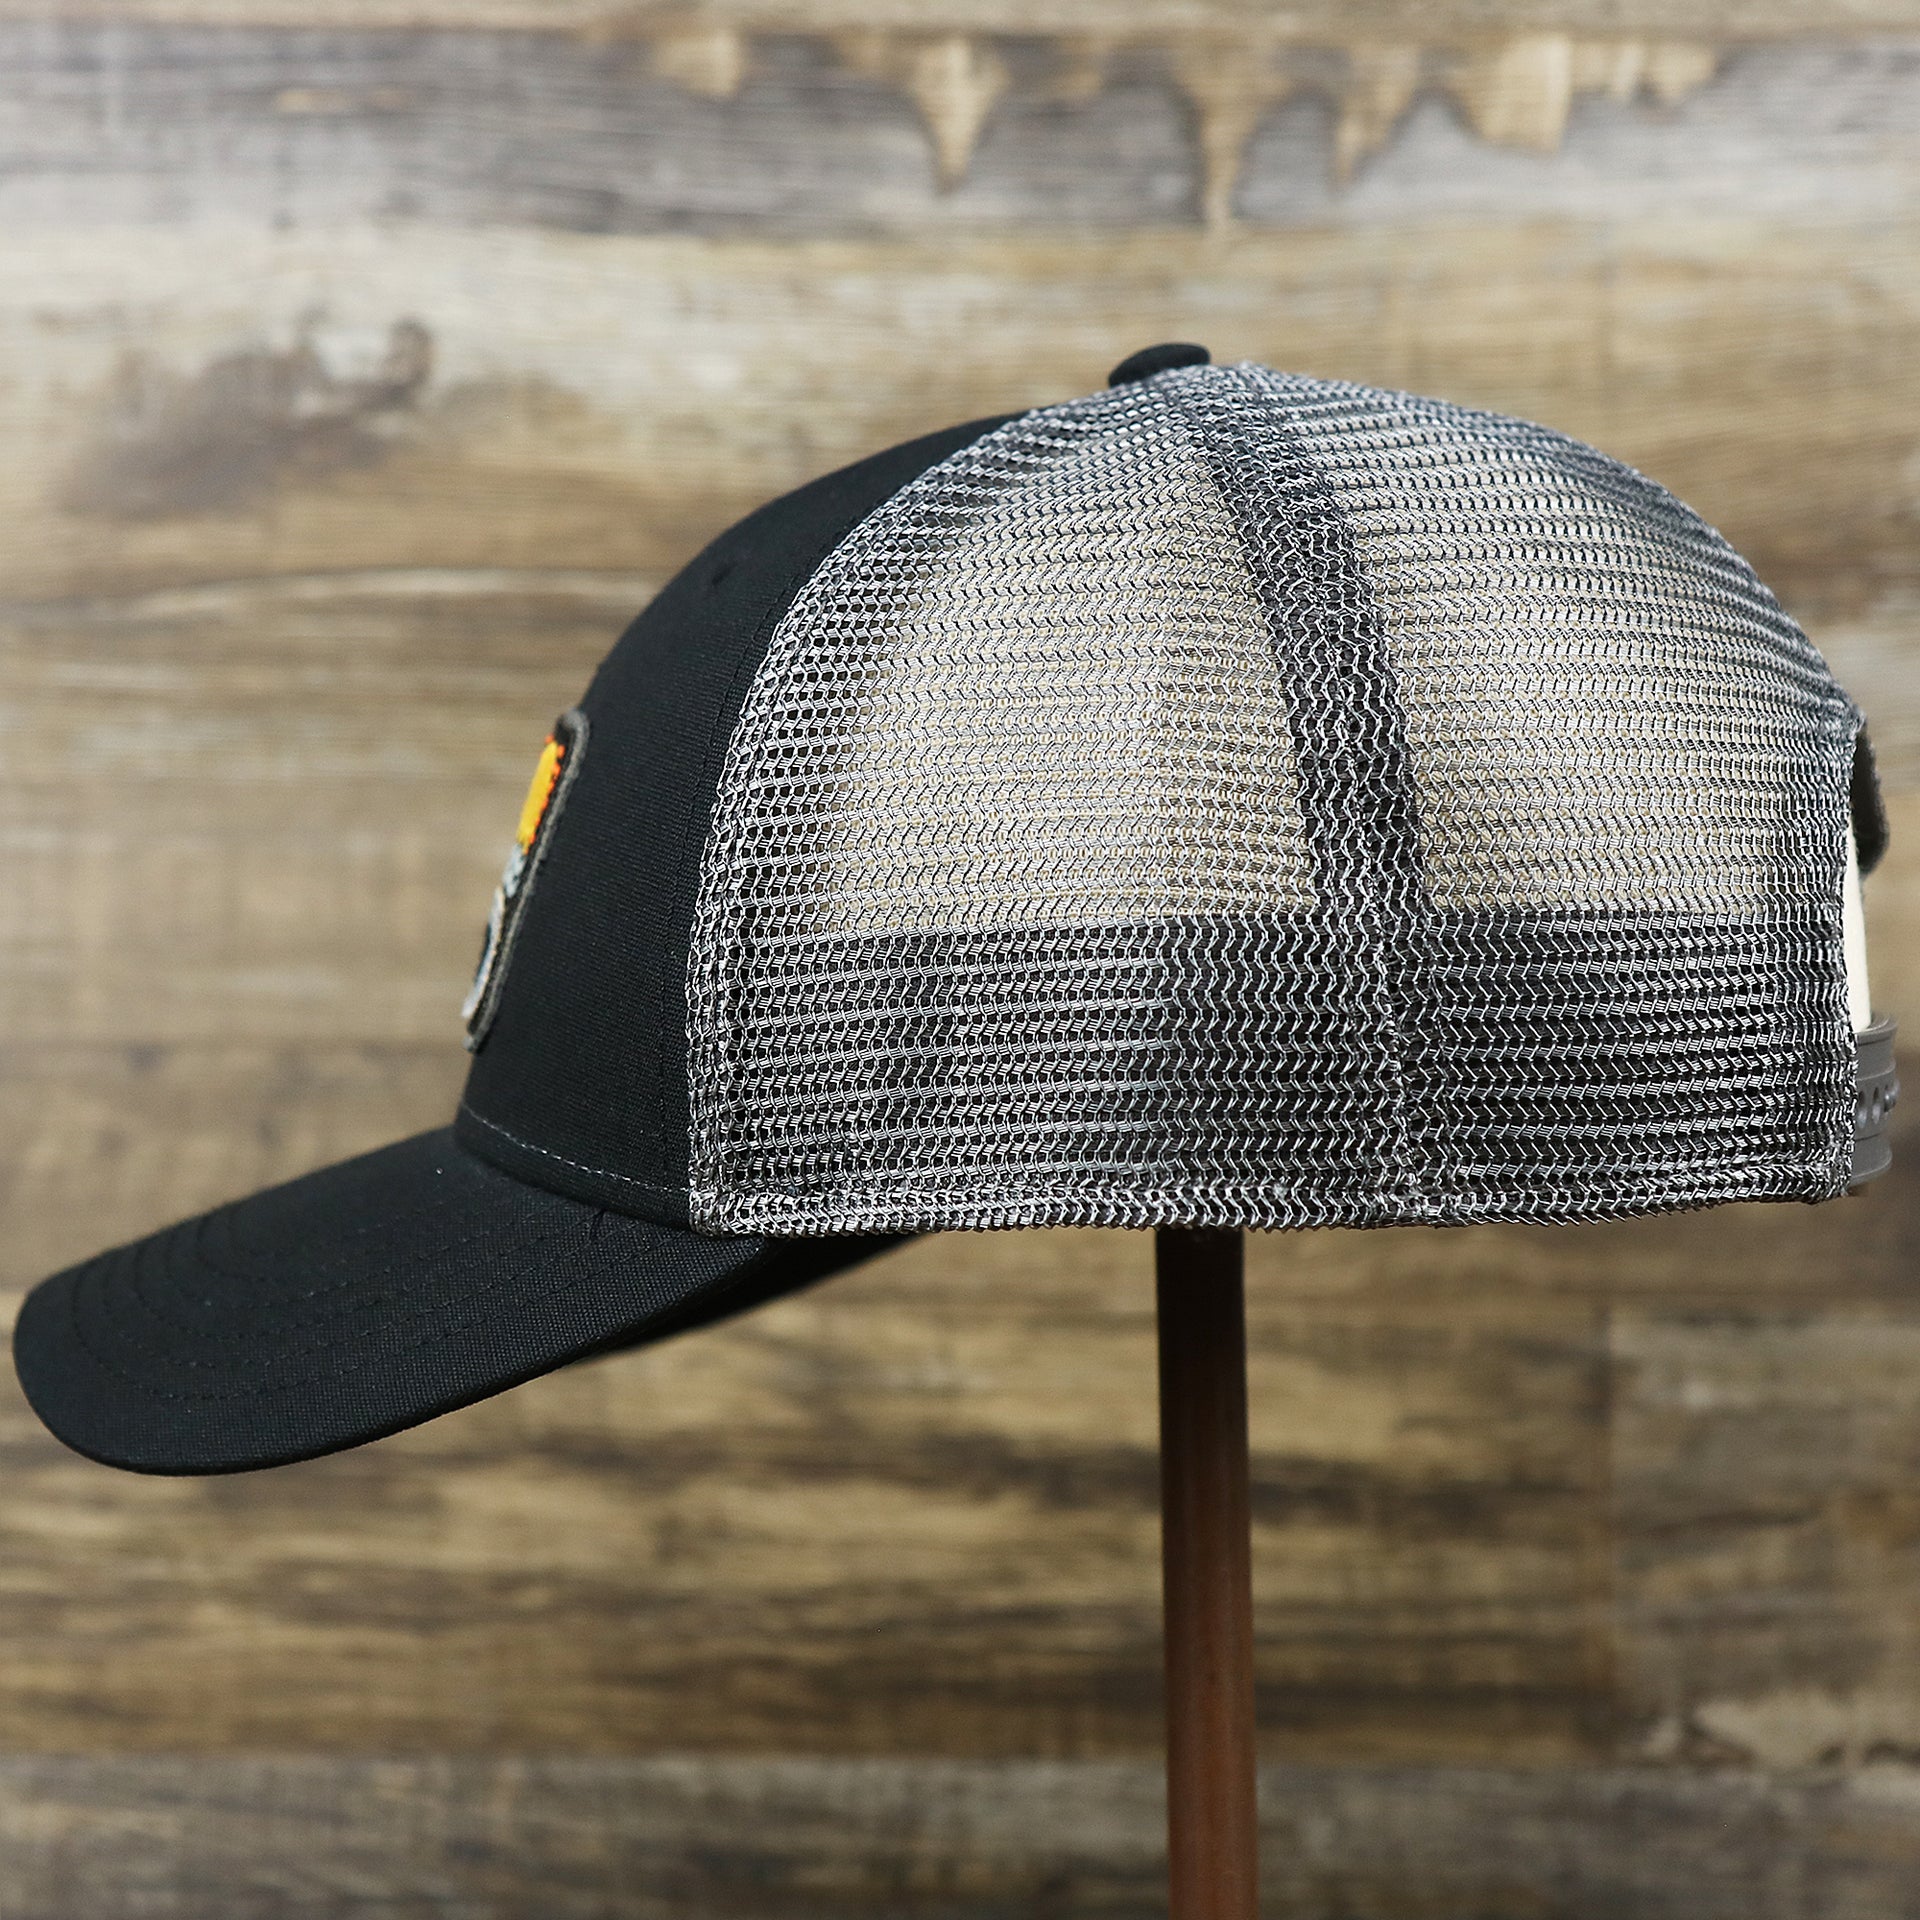 The wearer's left on the Youth New Jersey Ocean City Sunset Mesh Back Trucker Hat | Tahiti Blue And Grey Mesh Trucker Hat